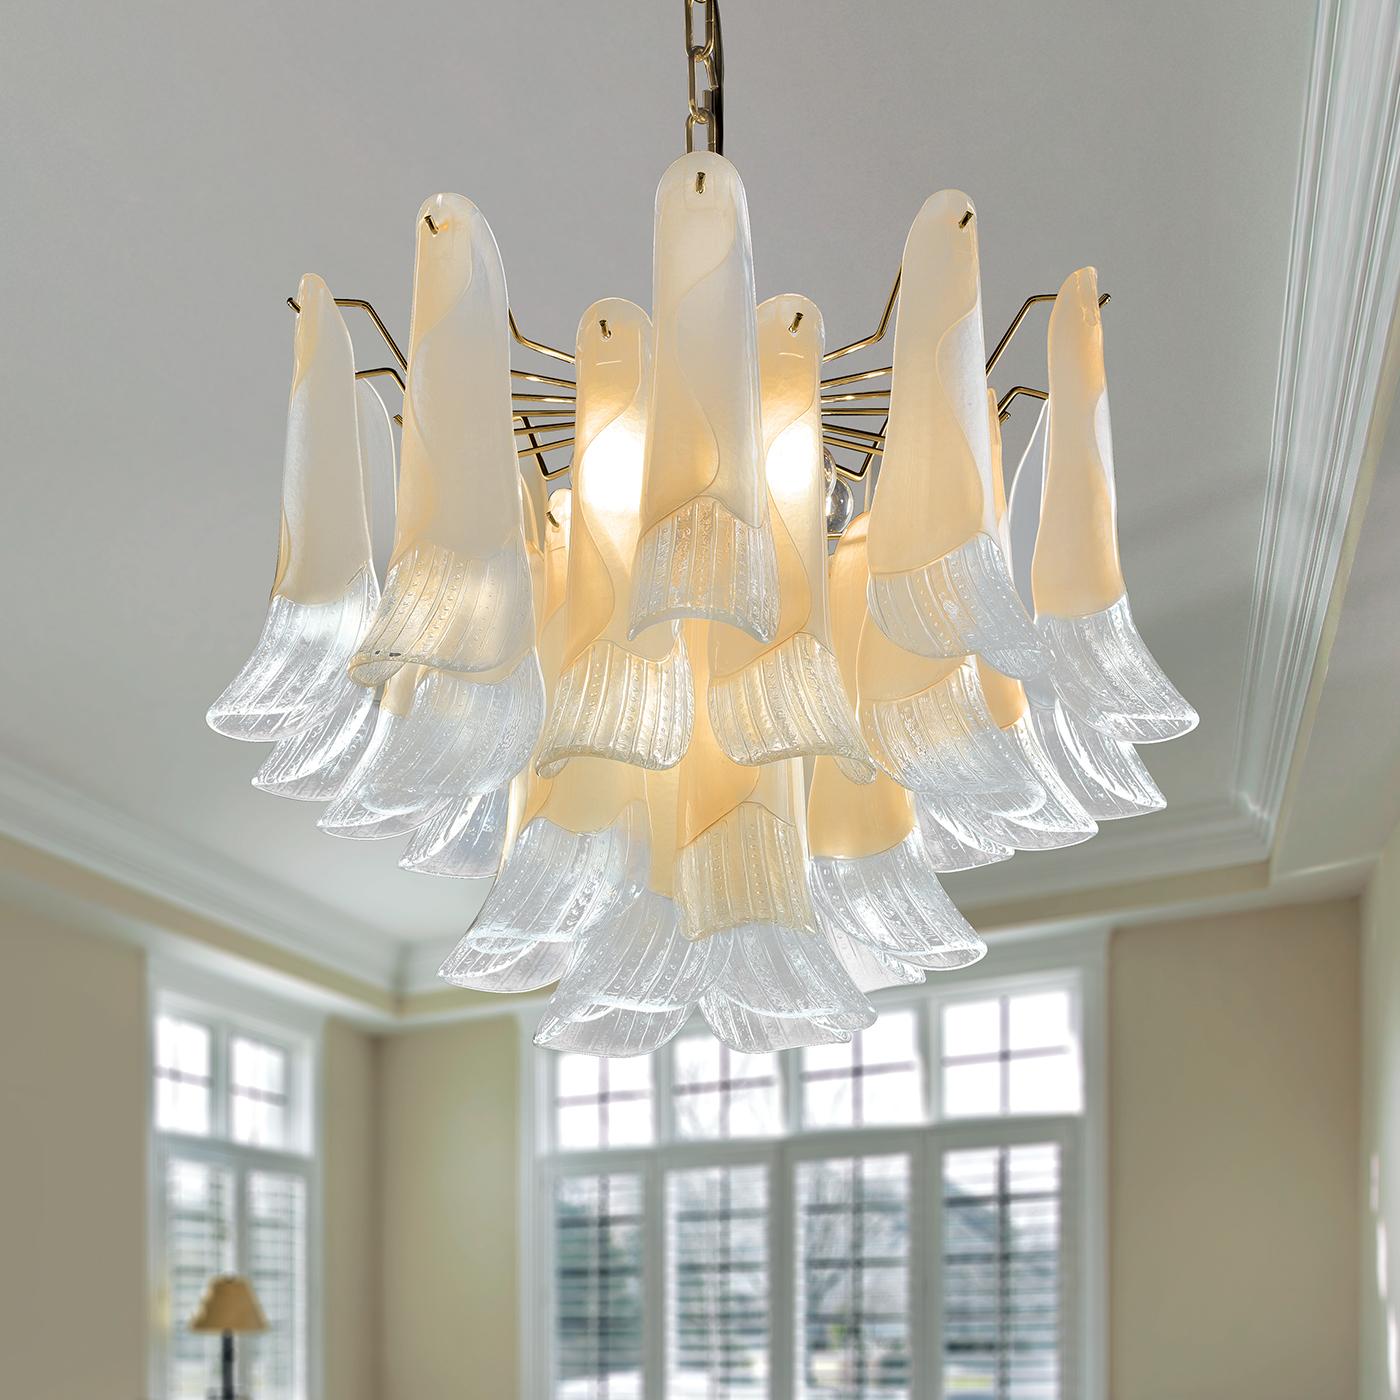 Just like a display of Calla Lillies suspended from the ceiling, this fabulous Chandelier brings a fresh and exuberant element to the room. Featuring 9 elegant lamps crafted in white, pink or amber glass, this stunning lighting fixture has a